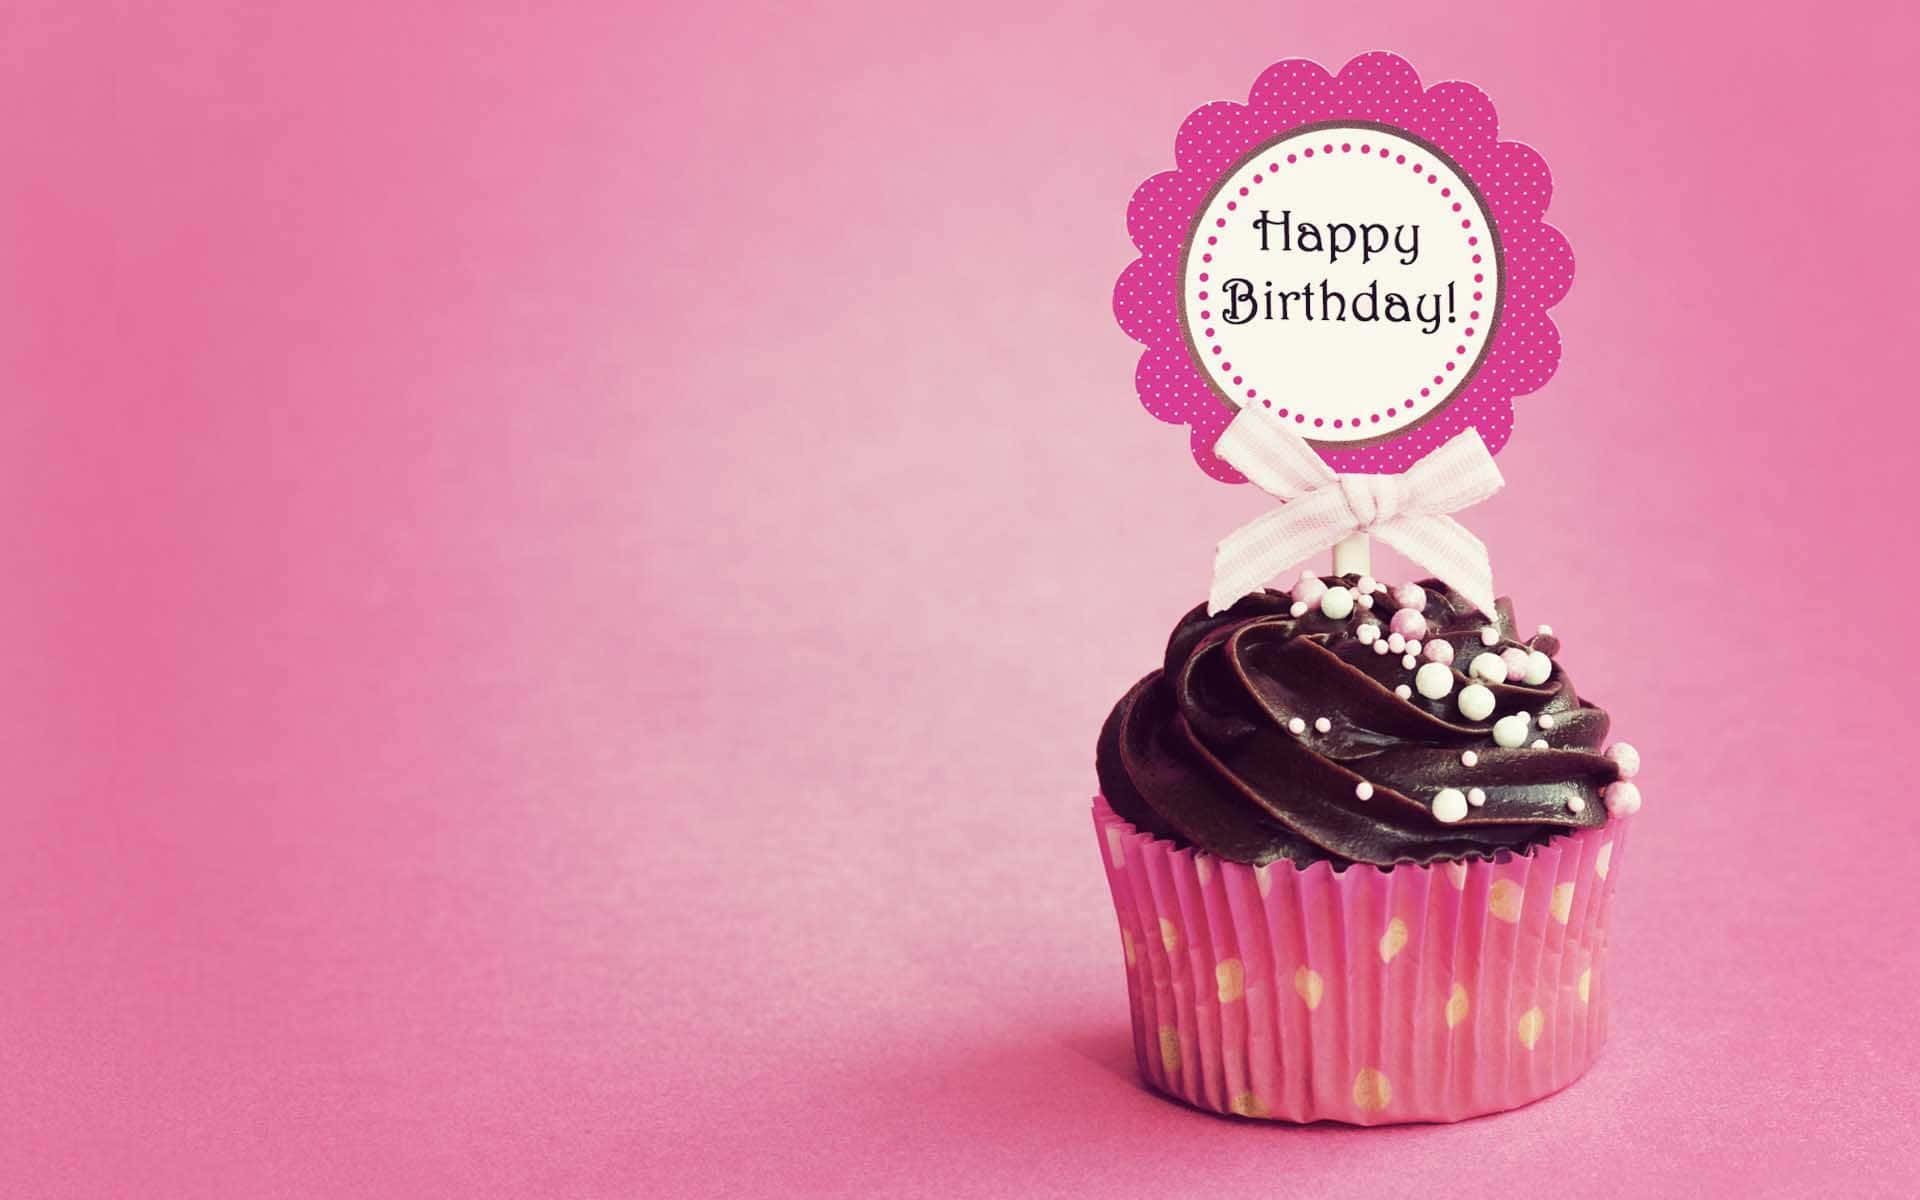 Celebrate with a pink birthday!